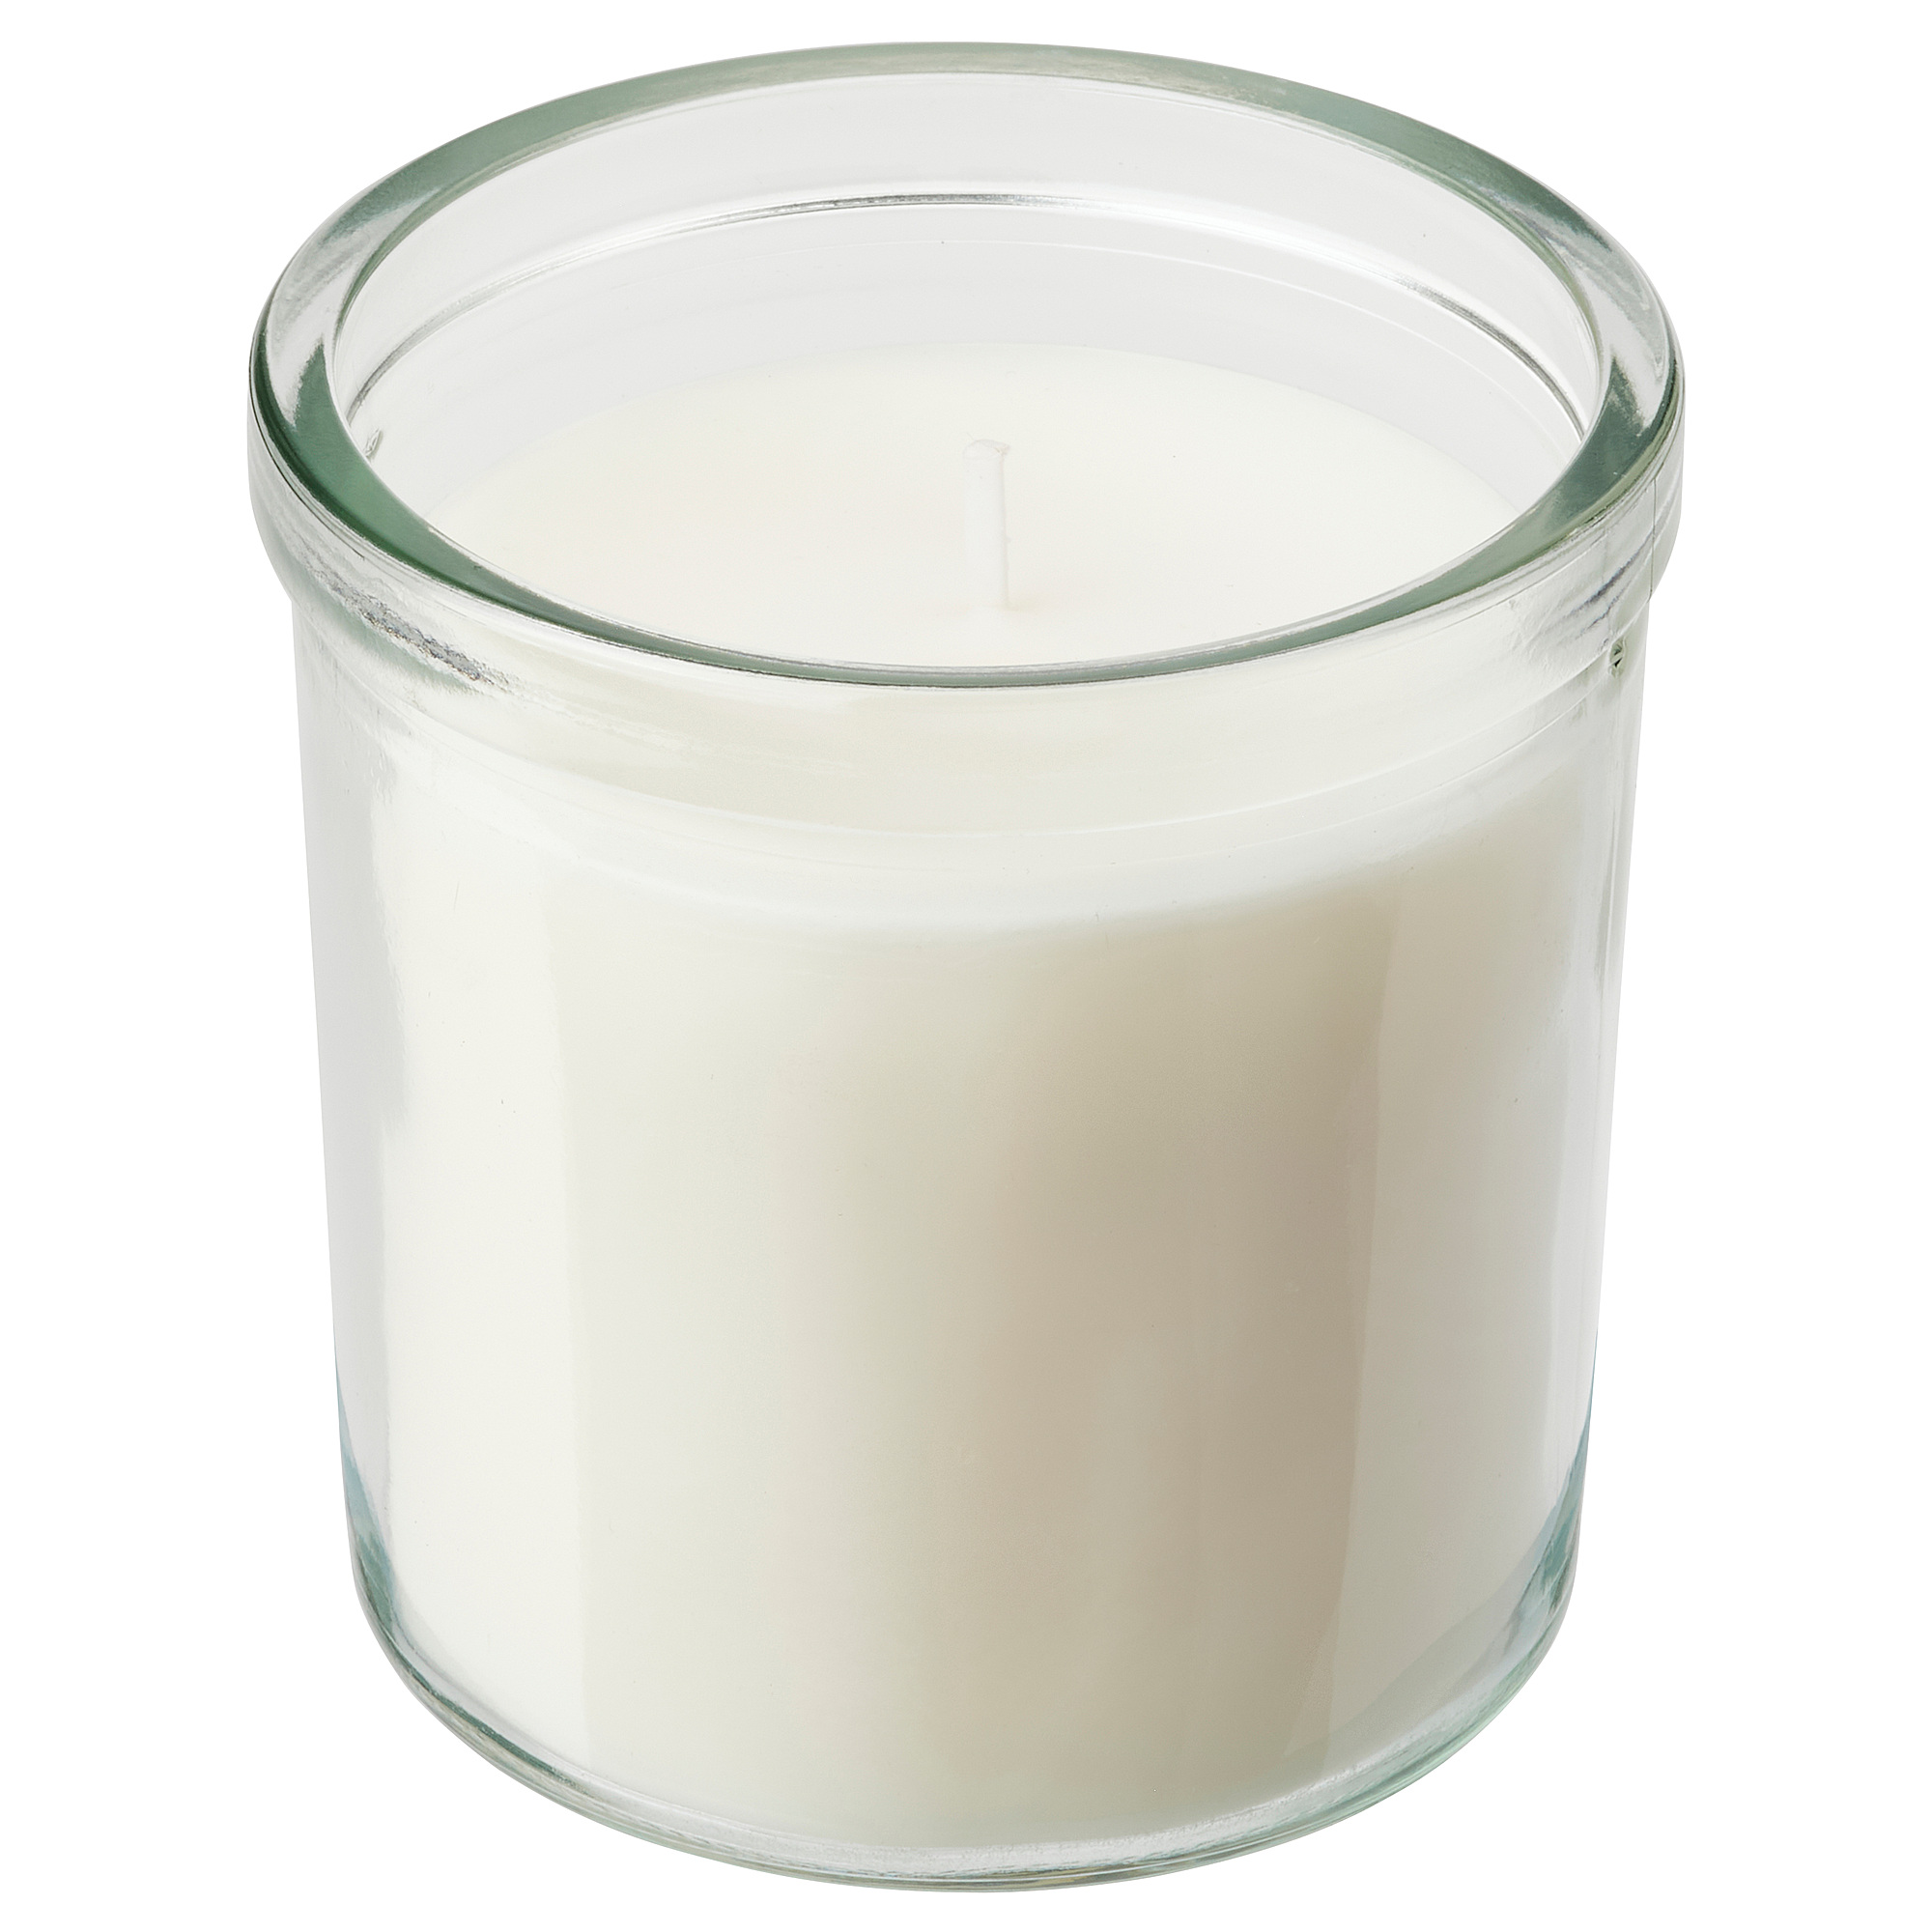 ADLAD scented candle in glass